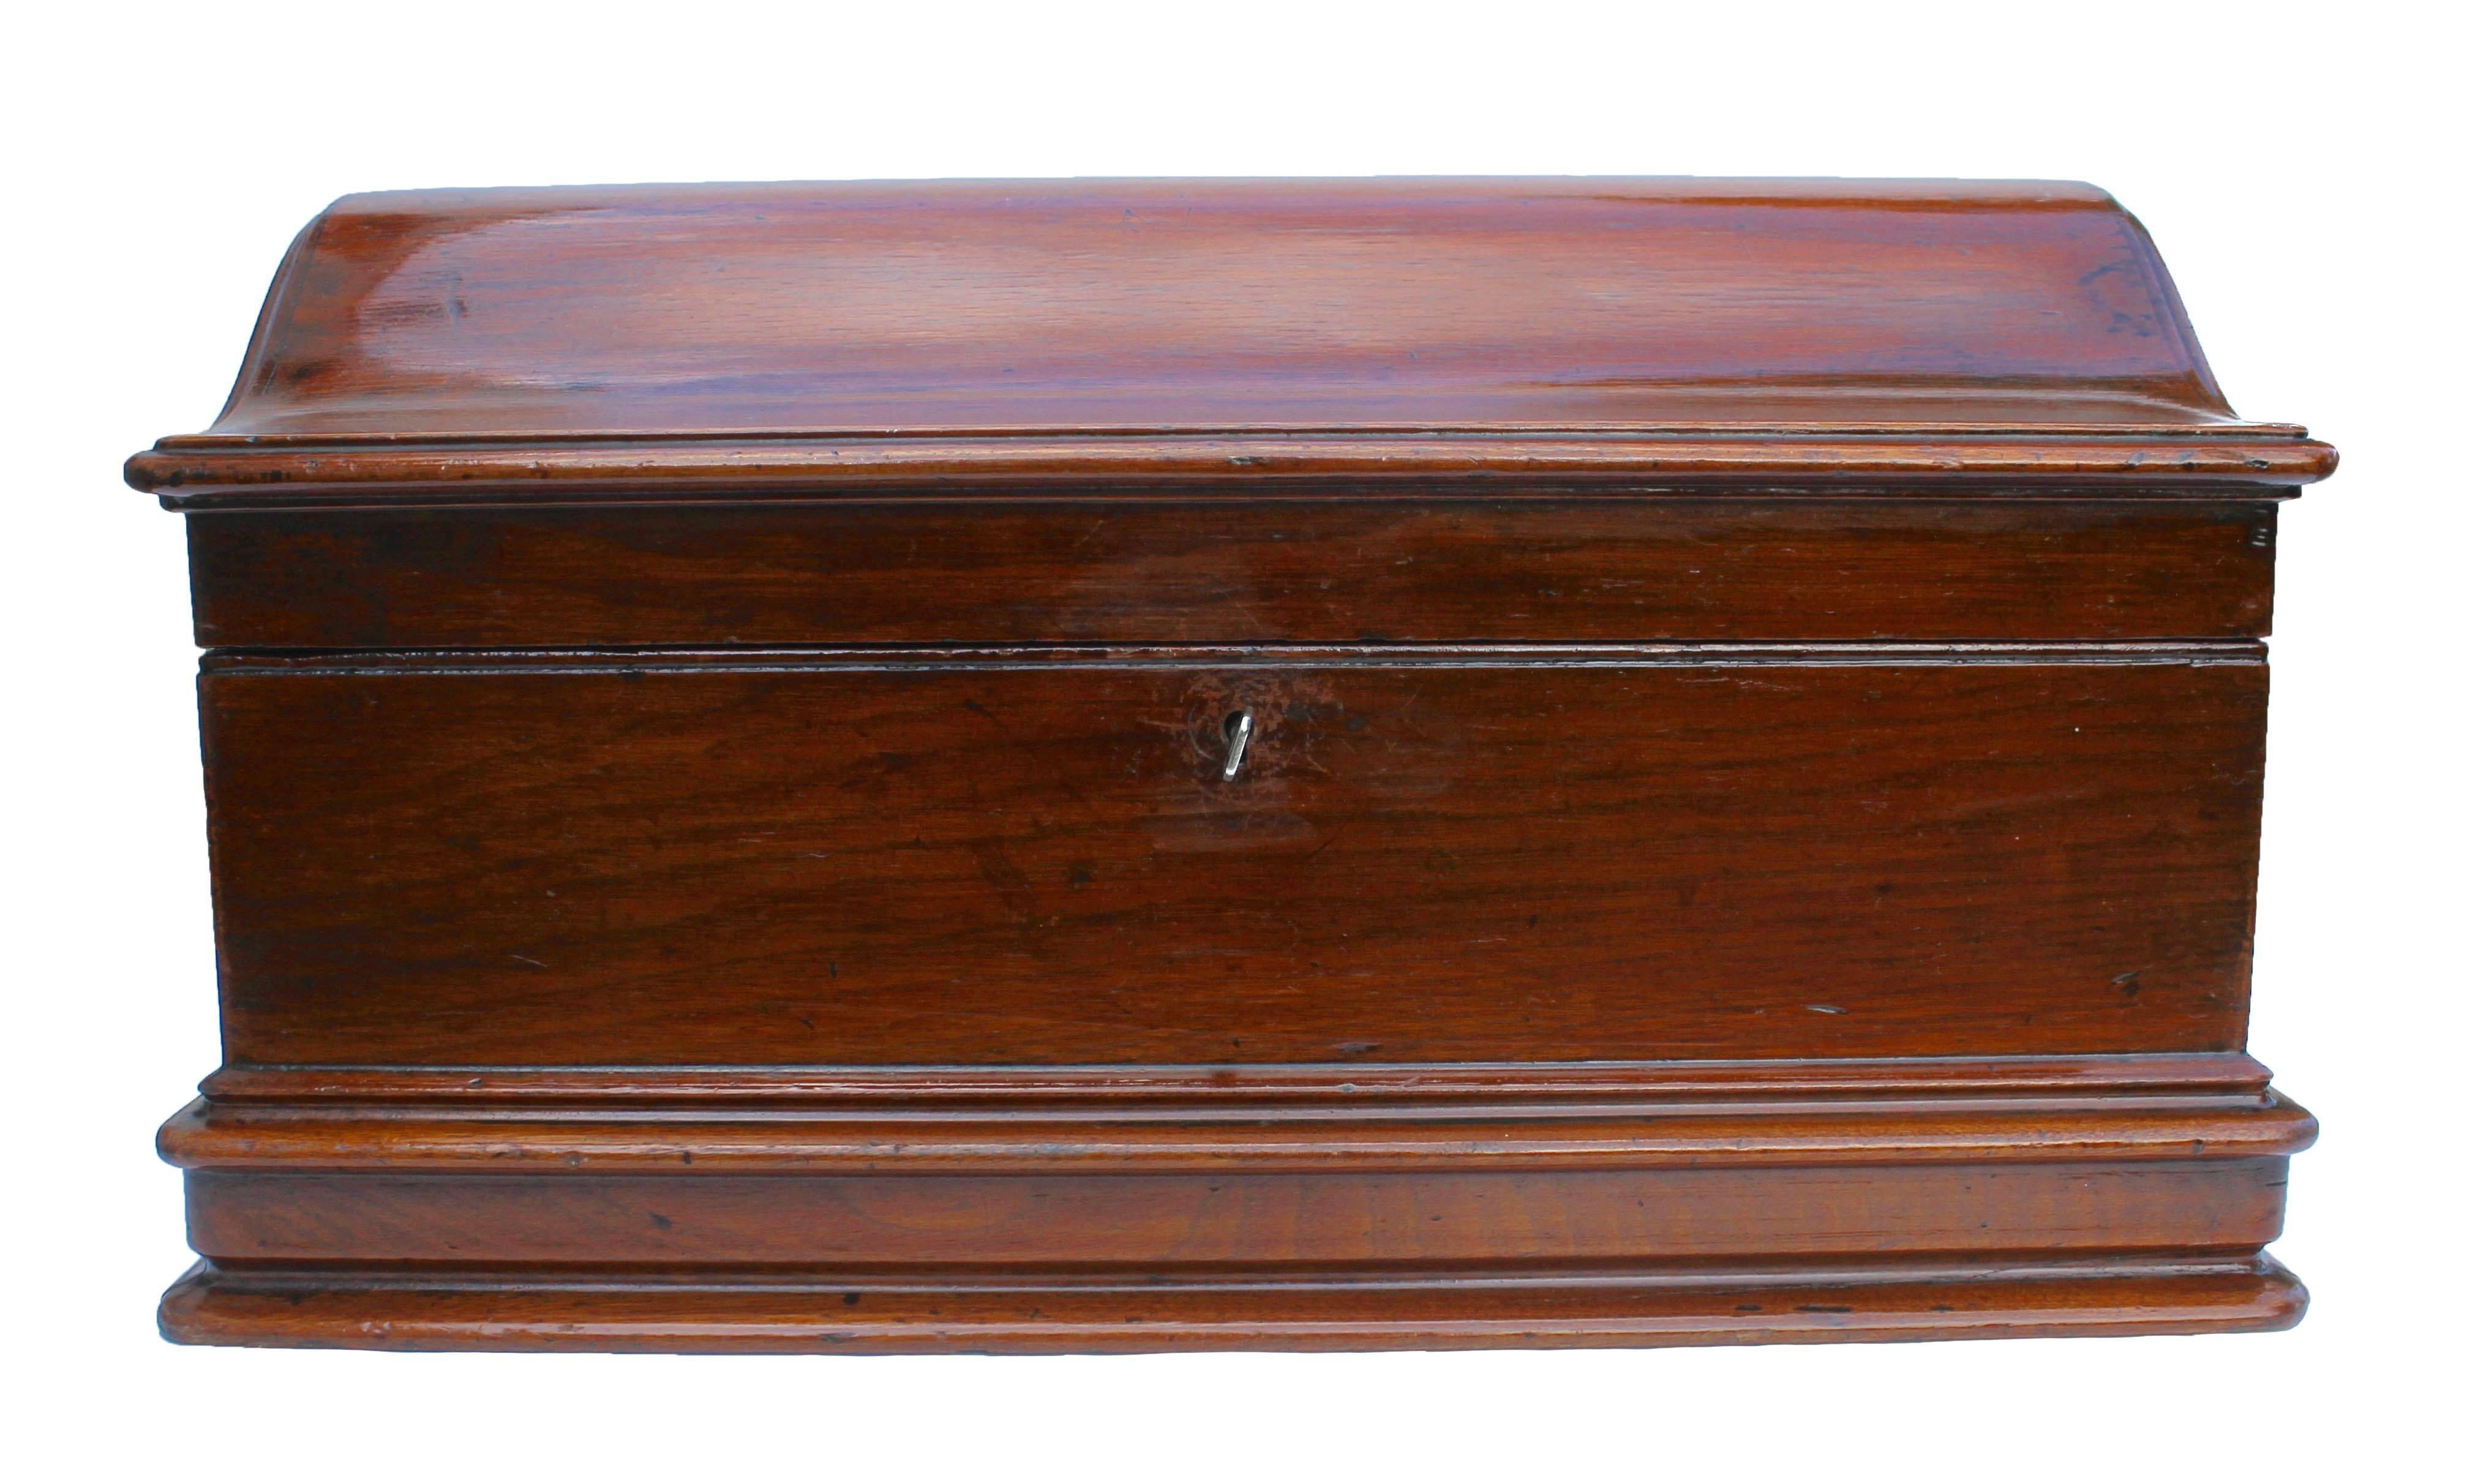 Stunning large Biedermeier  Mahogany wooden box, Austria, circa 1890
The original fully functional lock and key.
The piece is in excellent condition and a real beauty!

We specialise in Art Nouveau , Art Deco and Vintage:
Please check our storefront